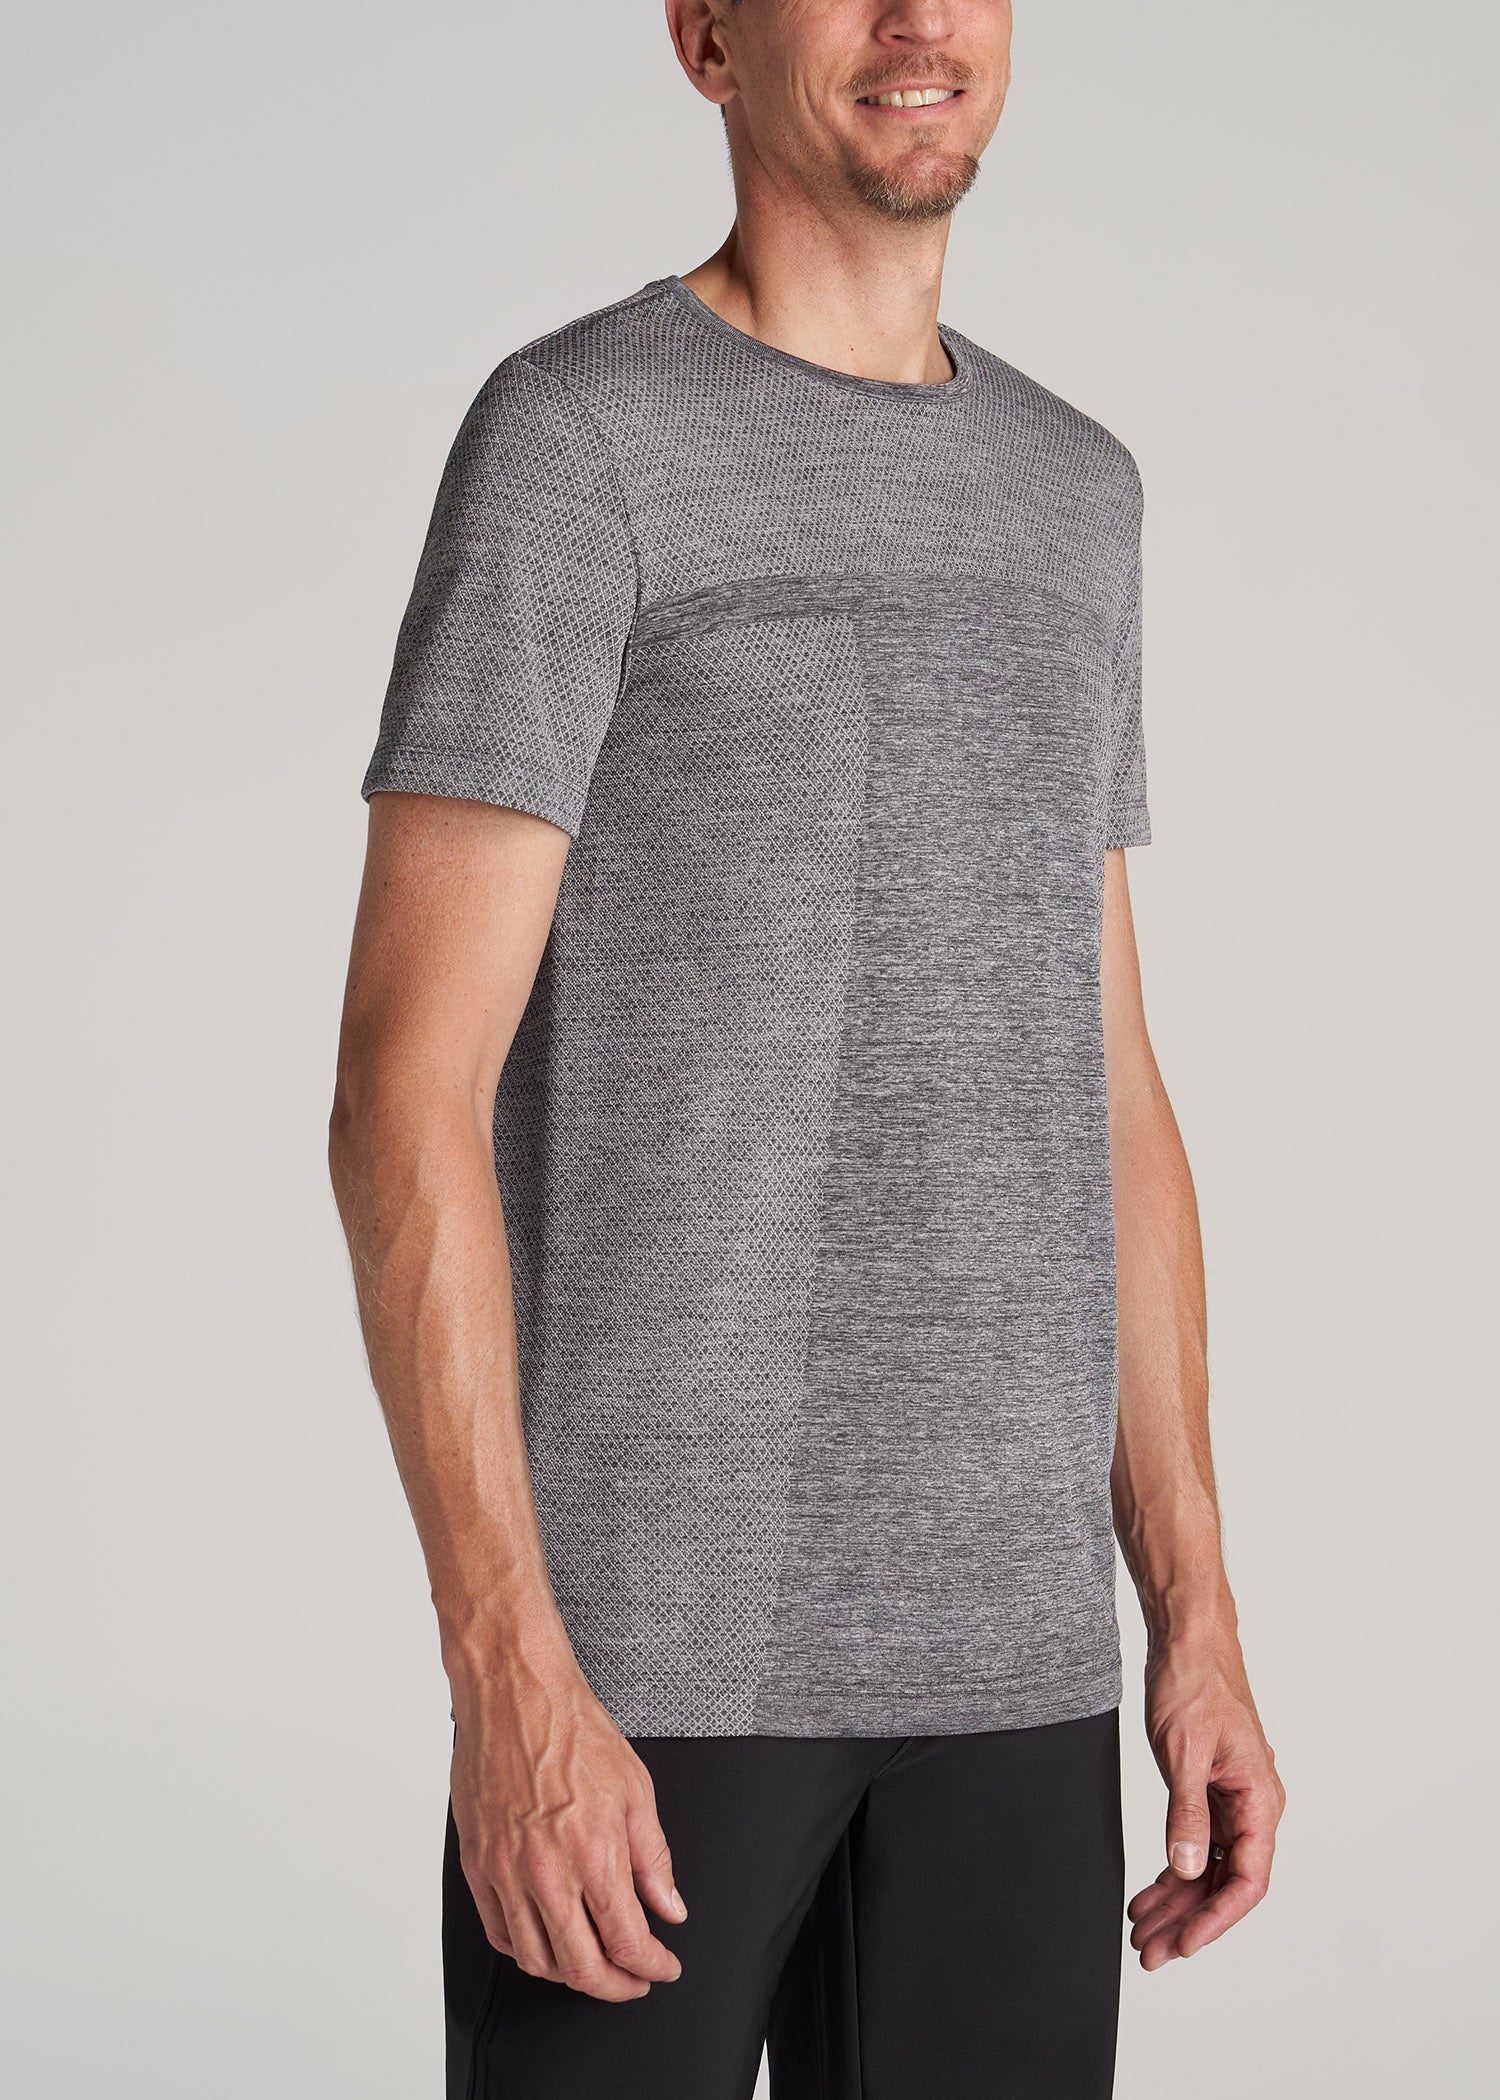     American-Tall-Men-AT-Performance-Short-Sleeve-Jersey-Athletic-Crewneck-Engineered-Tee-Grey-Mix-side